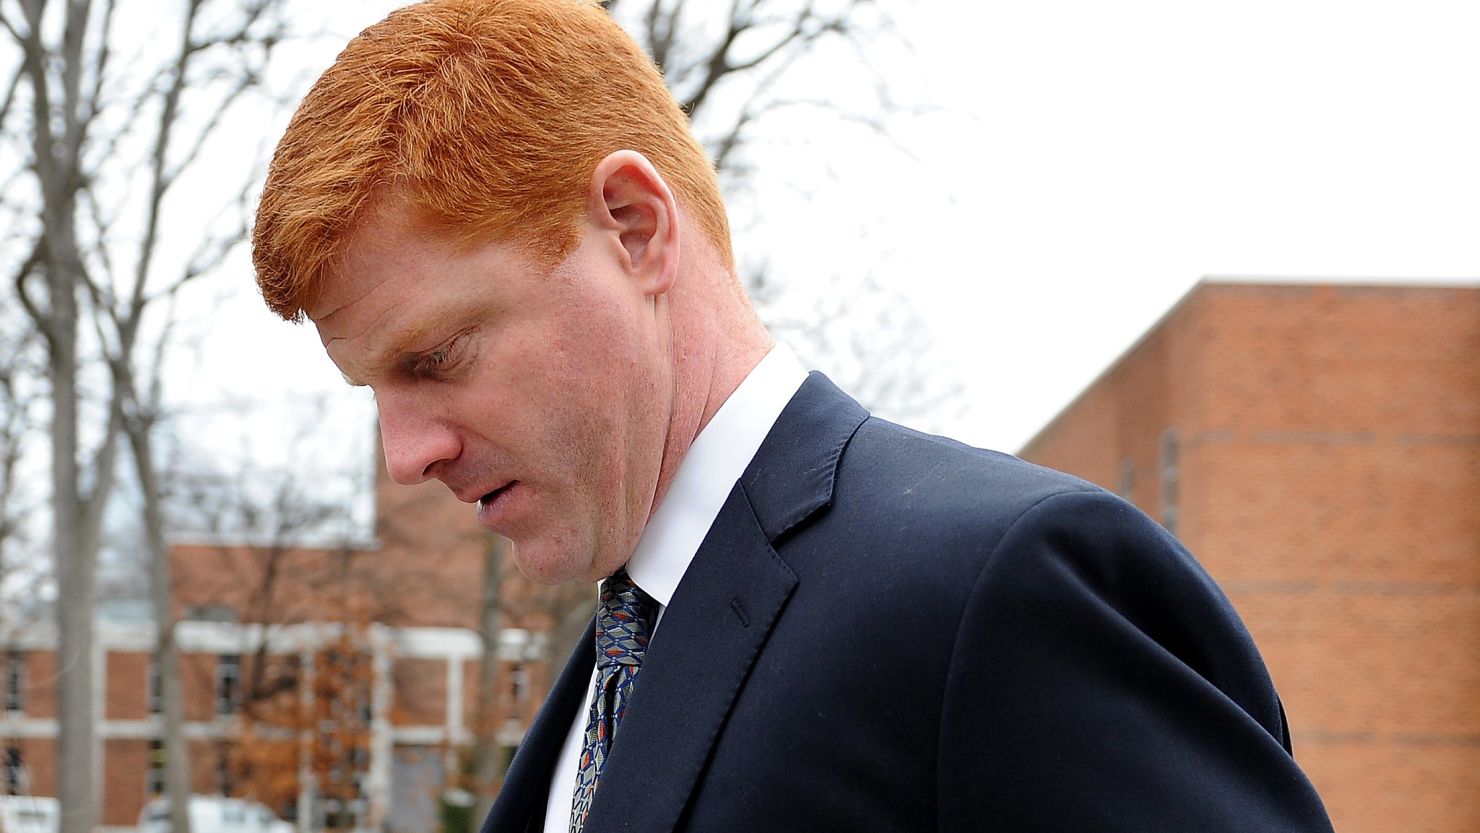 Former Penn State assistant coach Mike McQueary has filed a whistleblower lawsuit against the university.